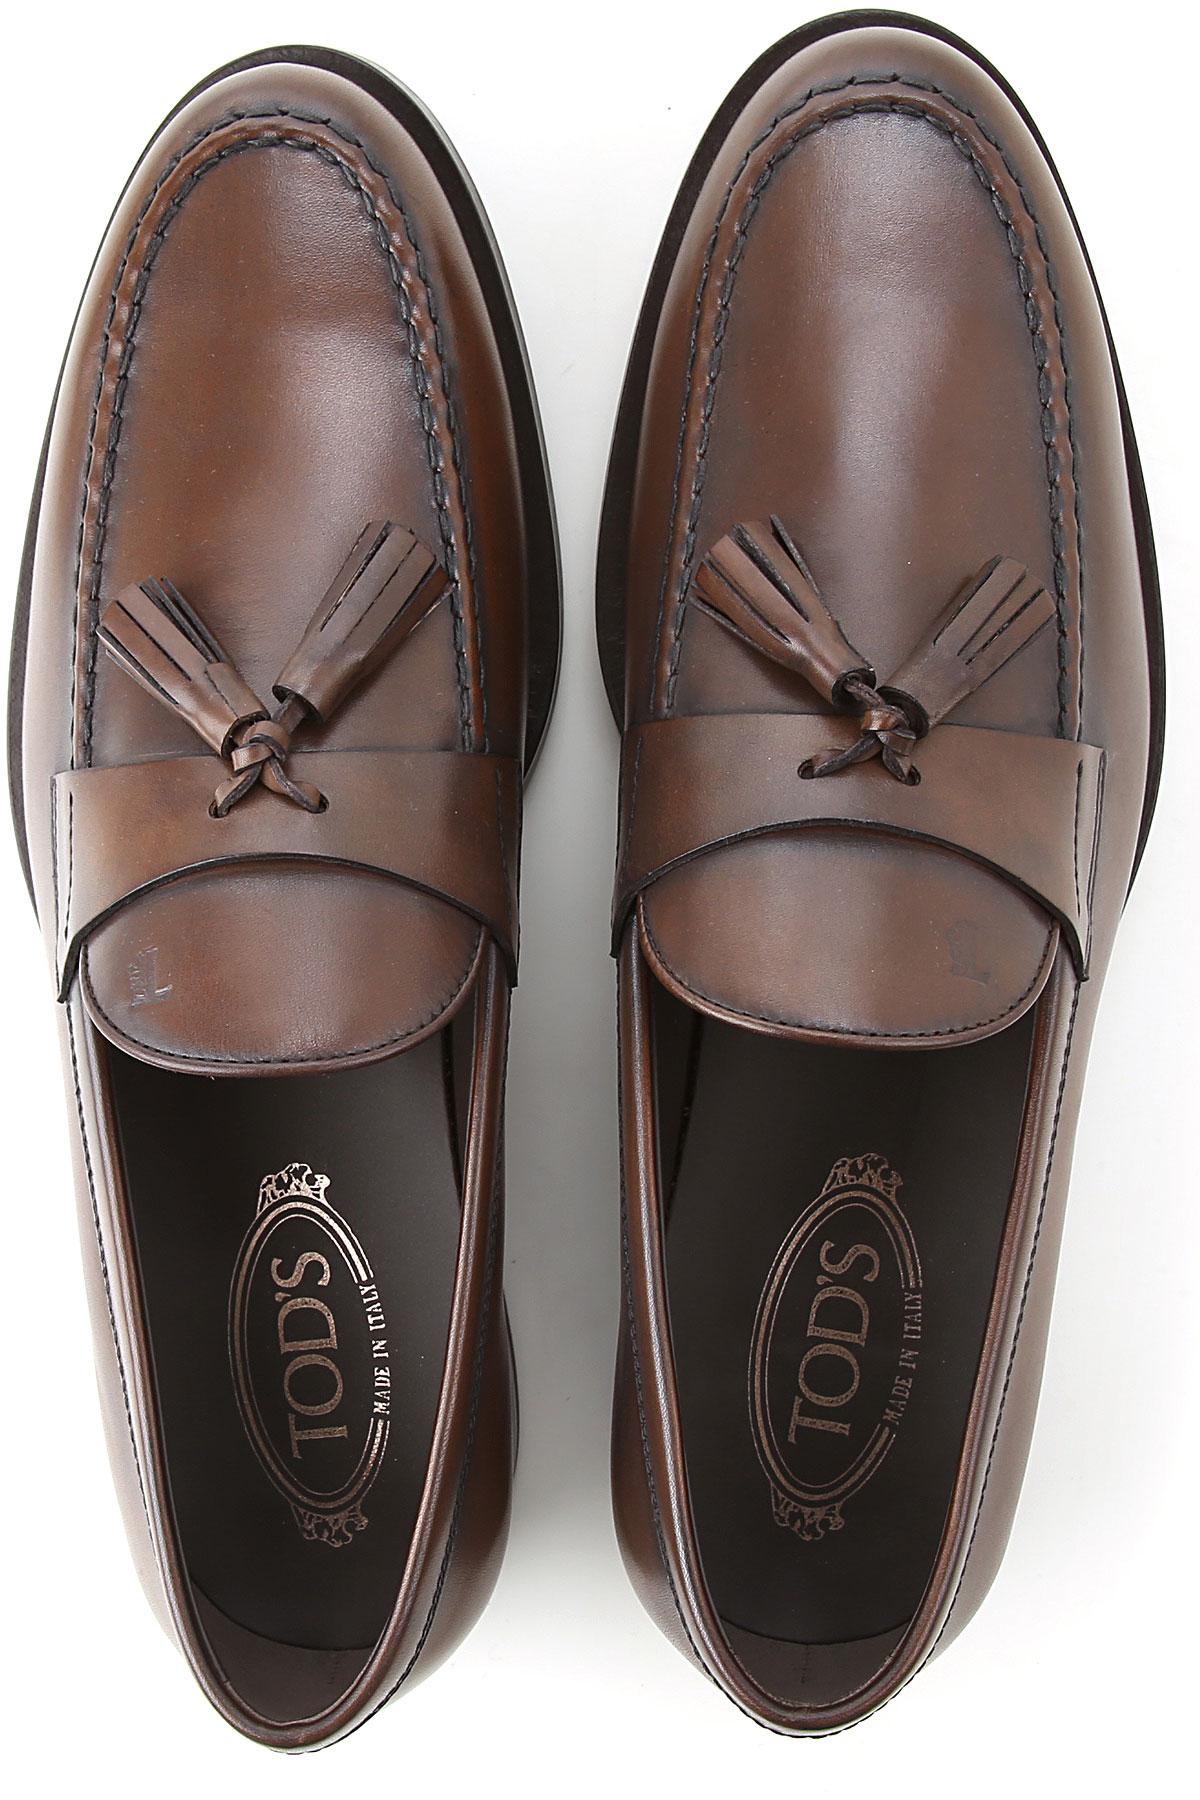 Tod's Leather Loafers For Men in Brown for Men - Lyst